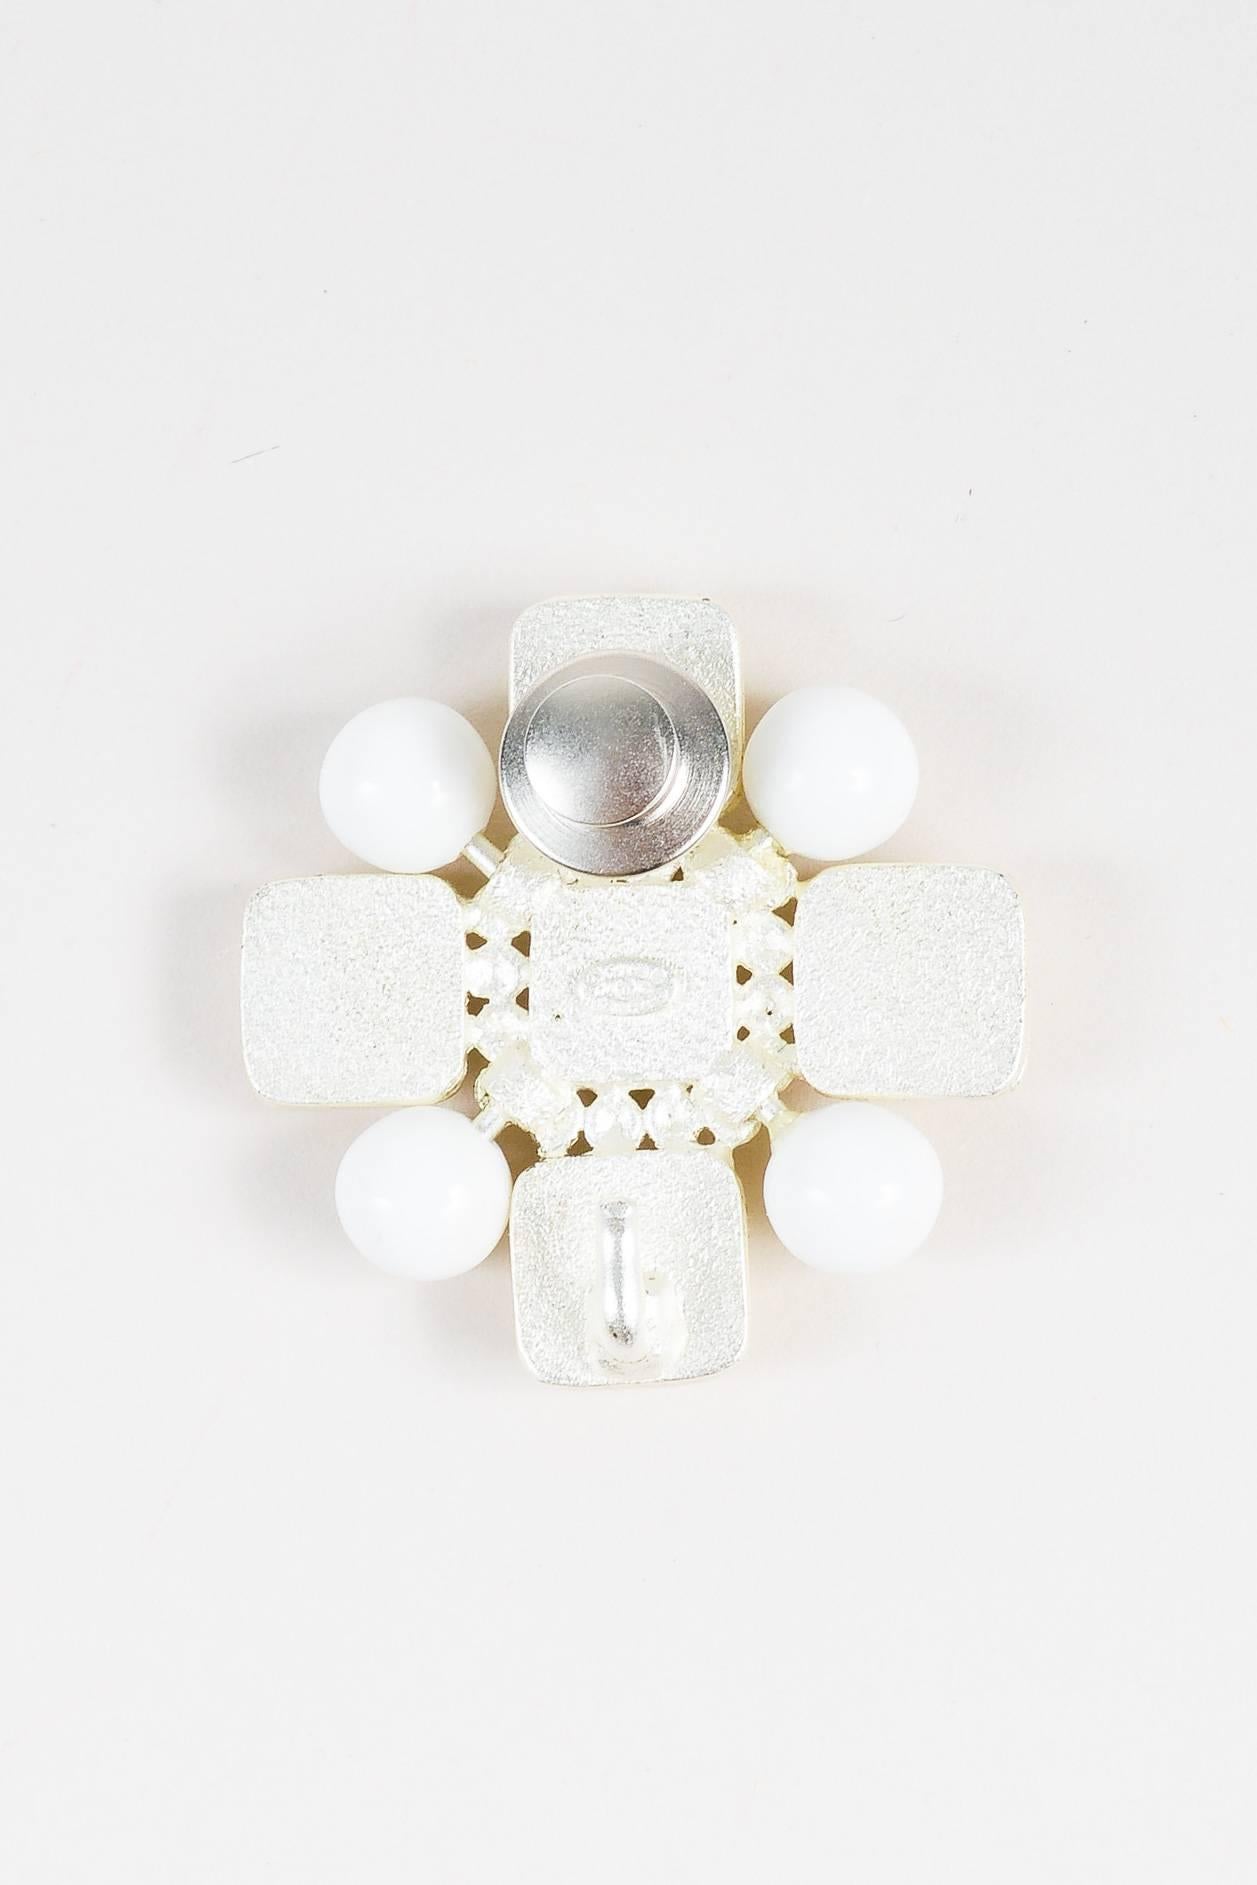 Uniquely chic brooch from the cruise 2004 collection. Light gold-tone metal; metallic silver-tone finish. Glossy enamel cubes with hammered detail. Round resin accents. Center 'CC' logo. Back pin closure. Comes with box and original